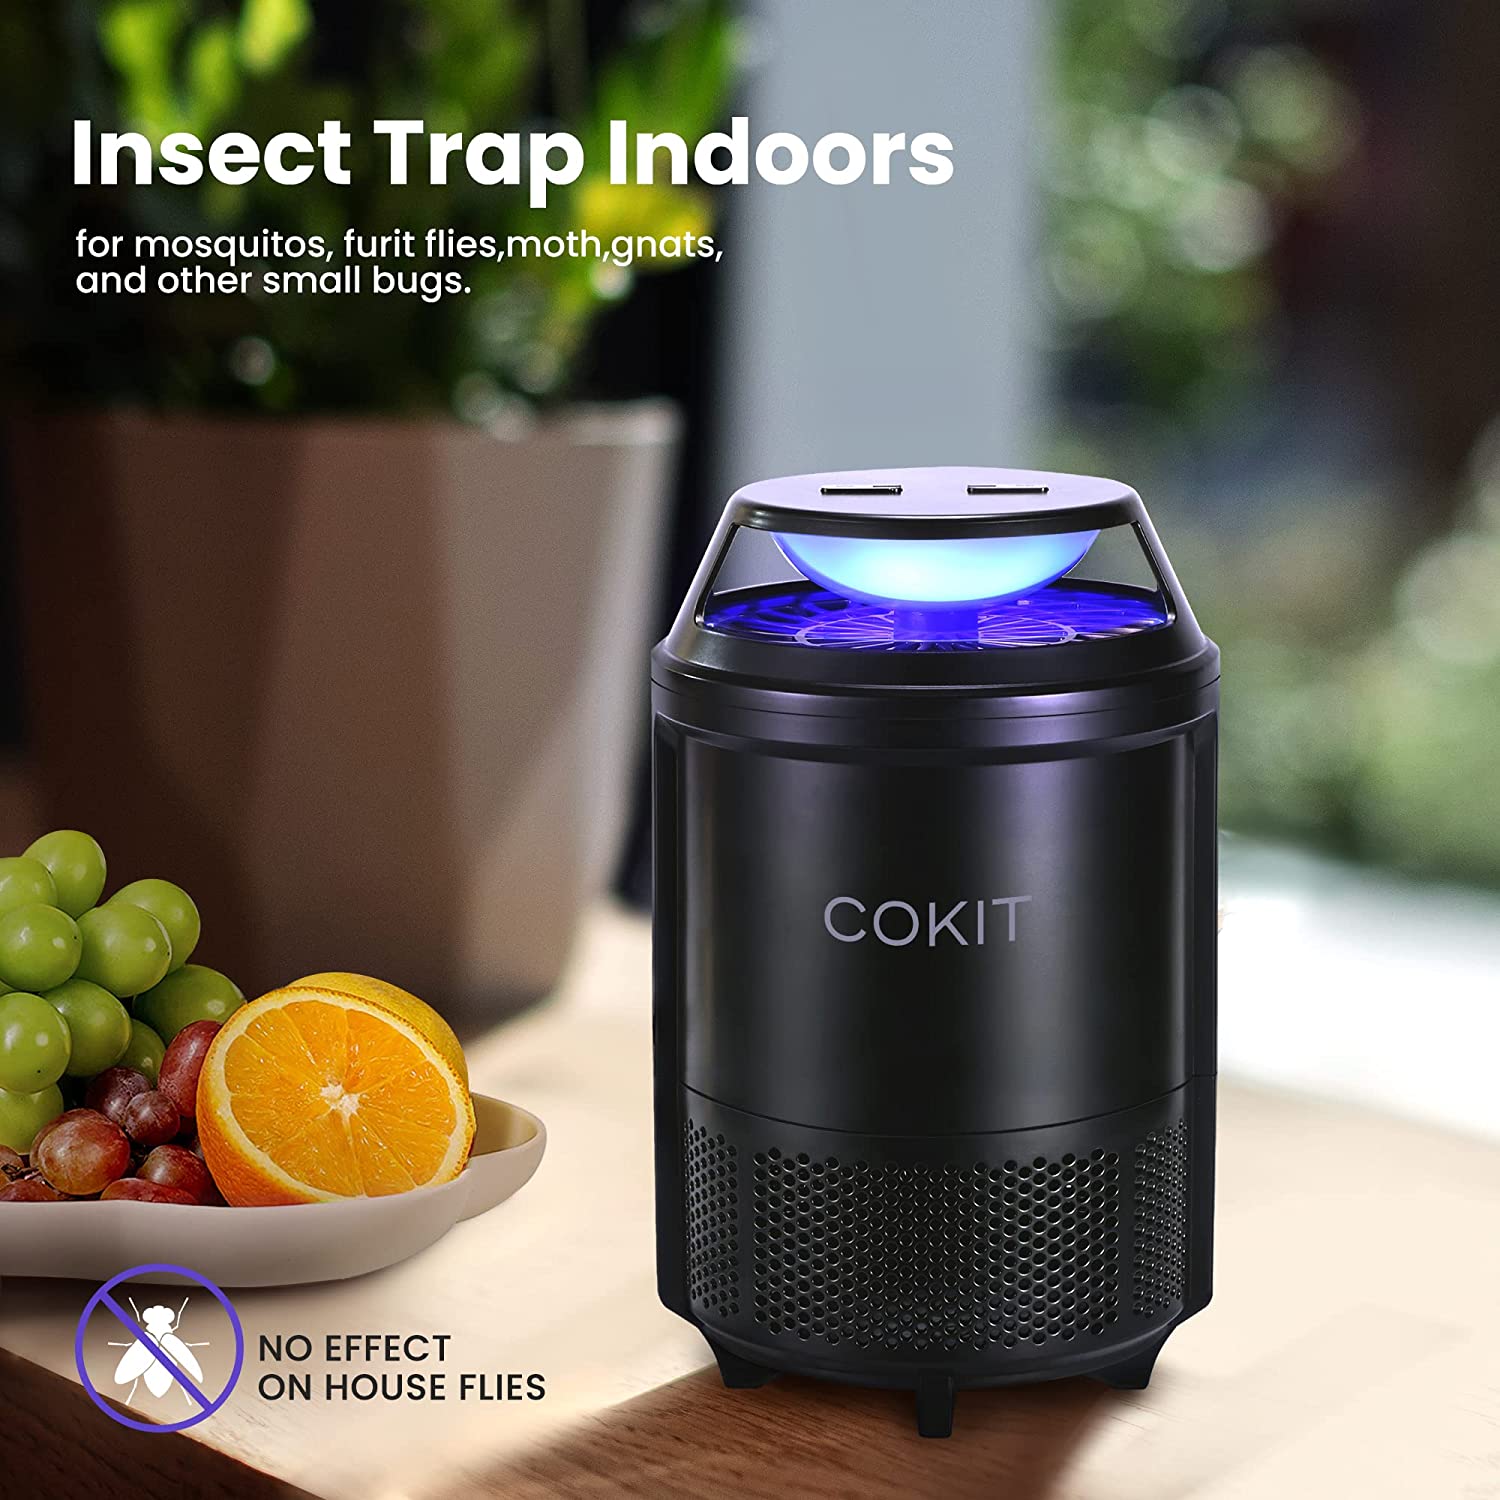 COKIT 2 Modes Insect Trap Indoors, Mosquitos & Bugs